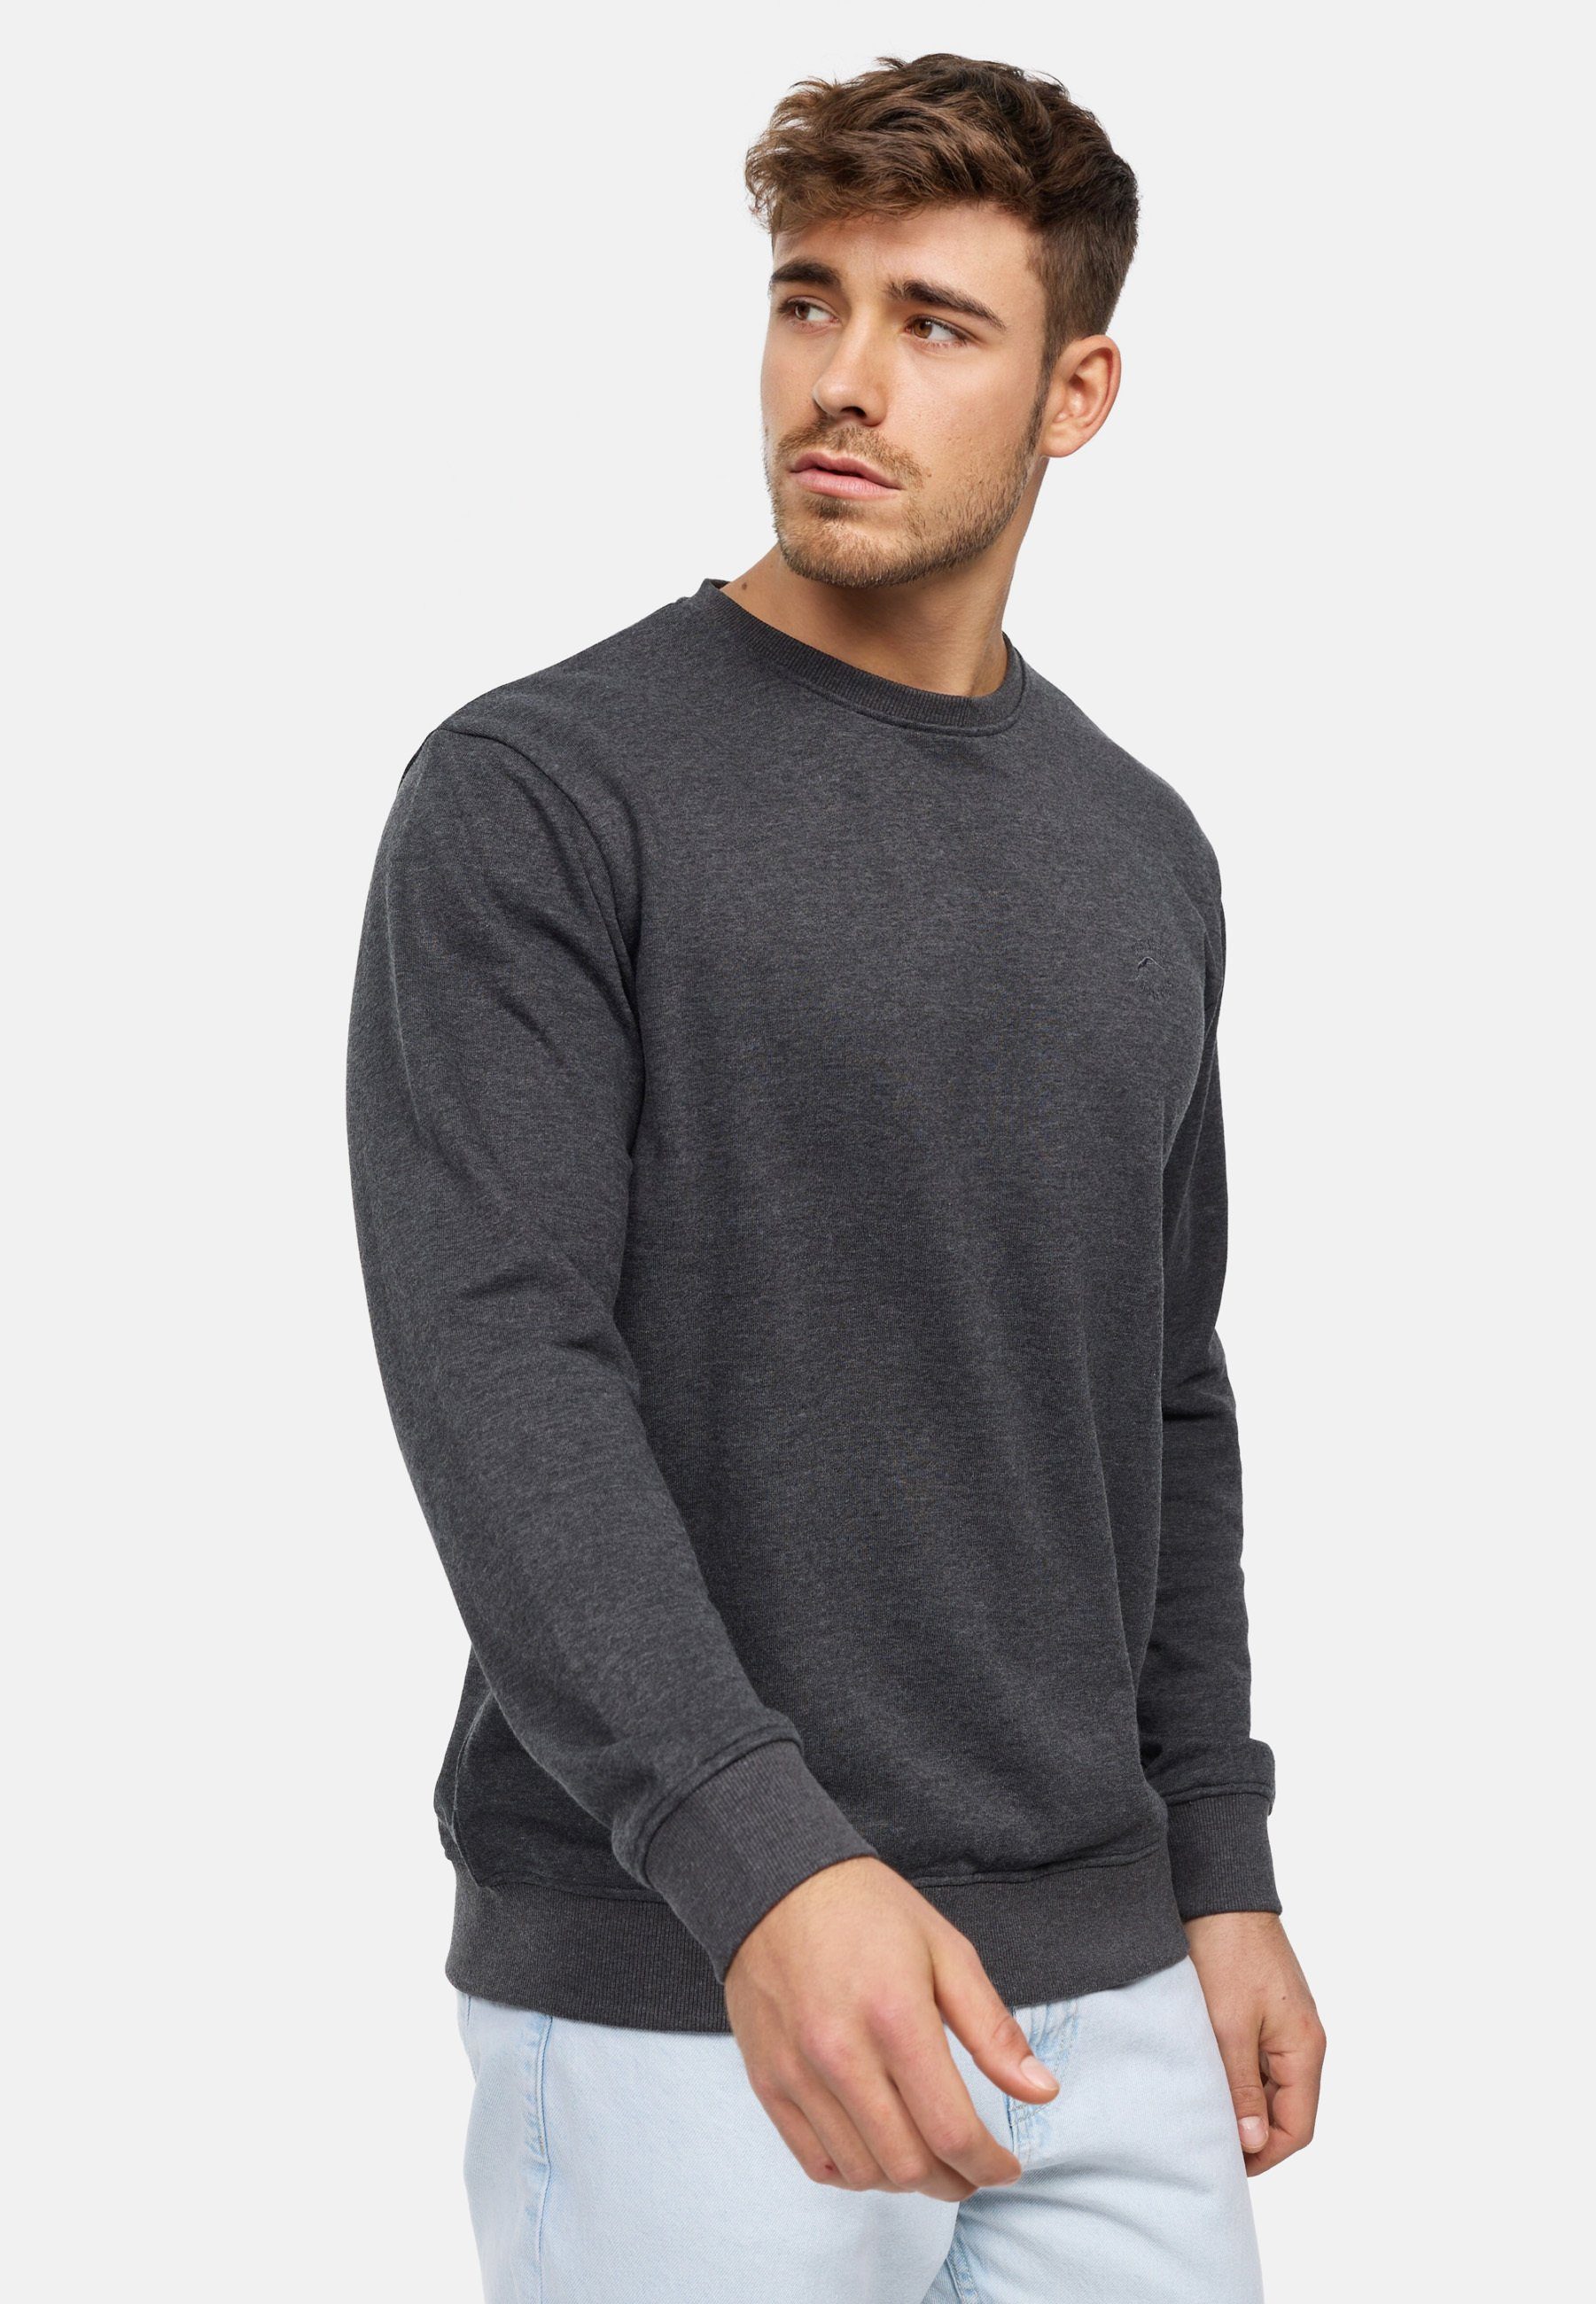 Mix Charcoal Sweater Holt Indicode